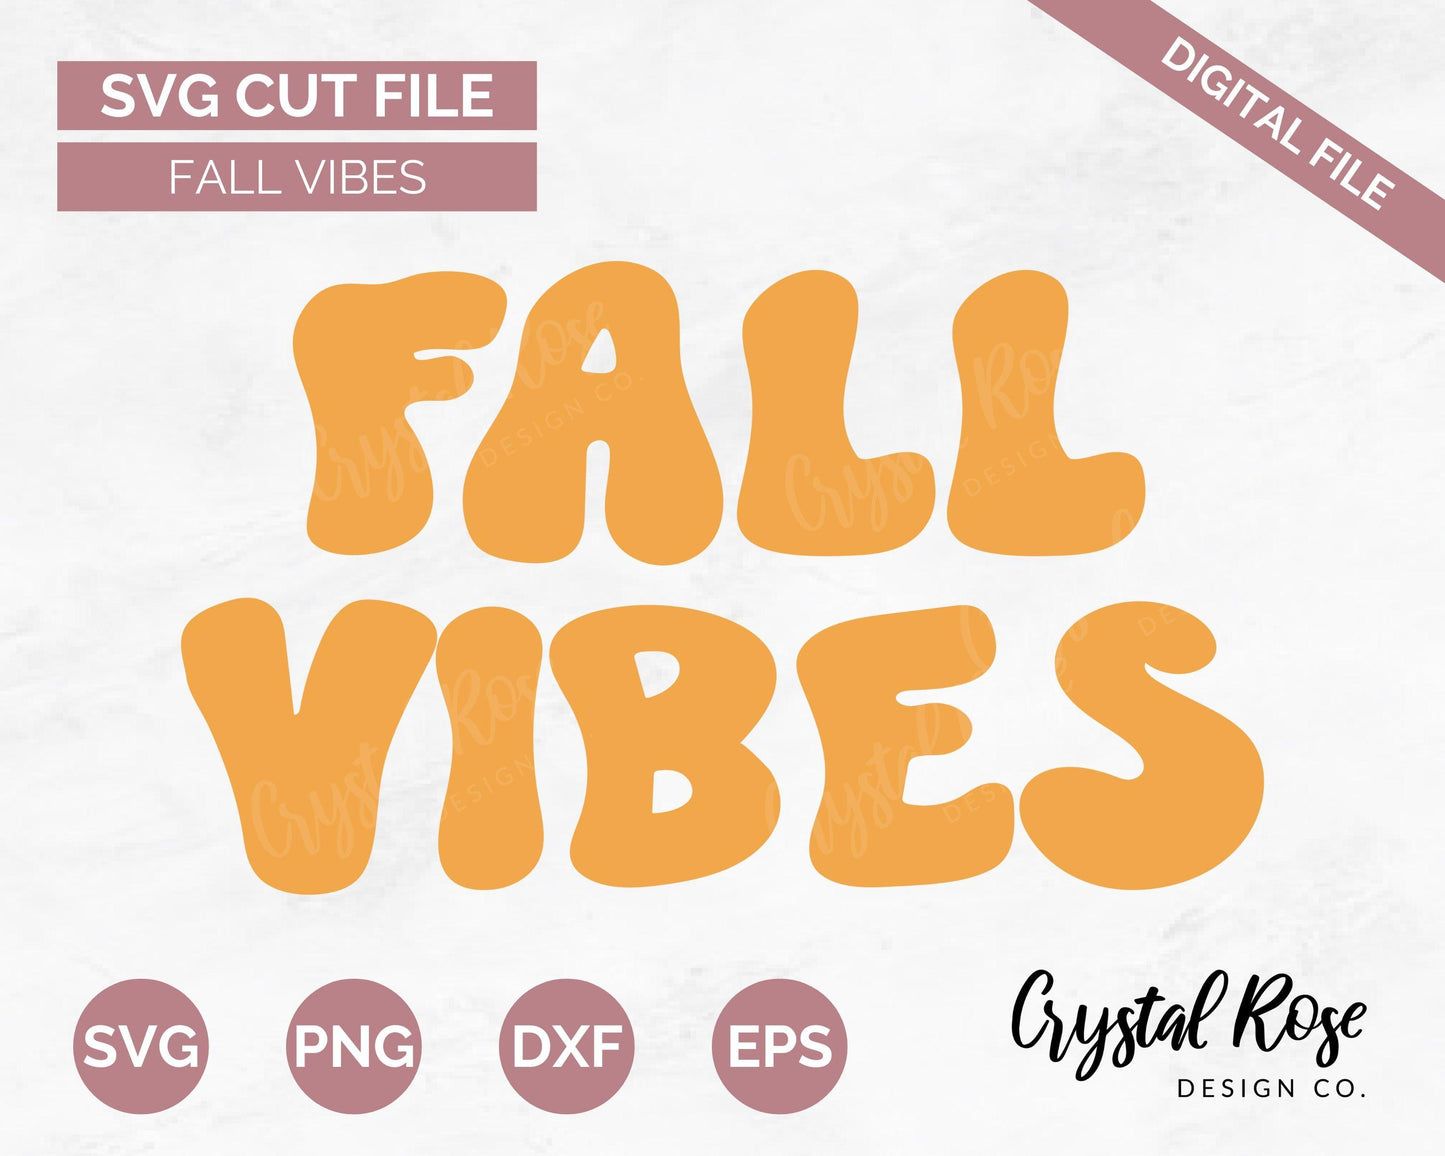 Fall Vibes SVG, Halloween SVG, Digital Download, Cricut, Silhouette, Glowforge (includes svg/png/dxf/eps)